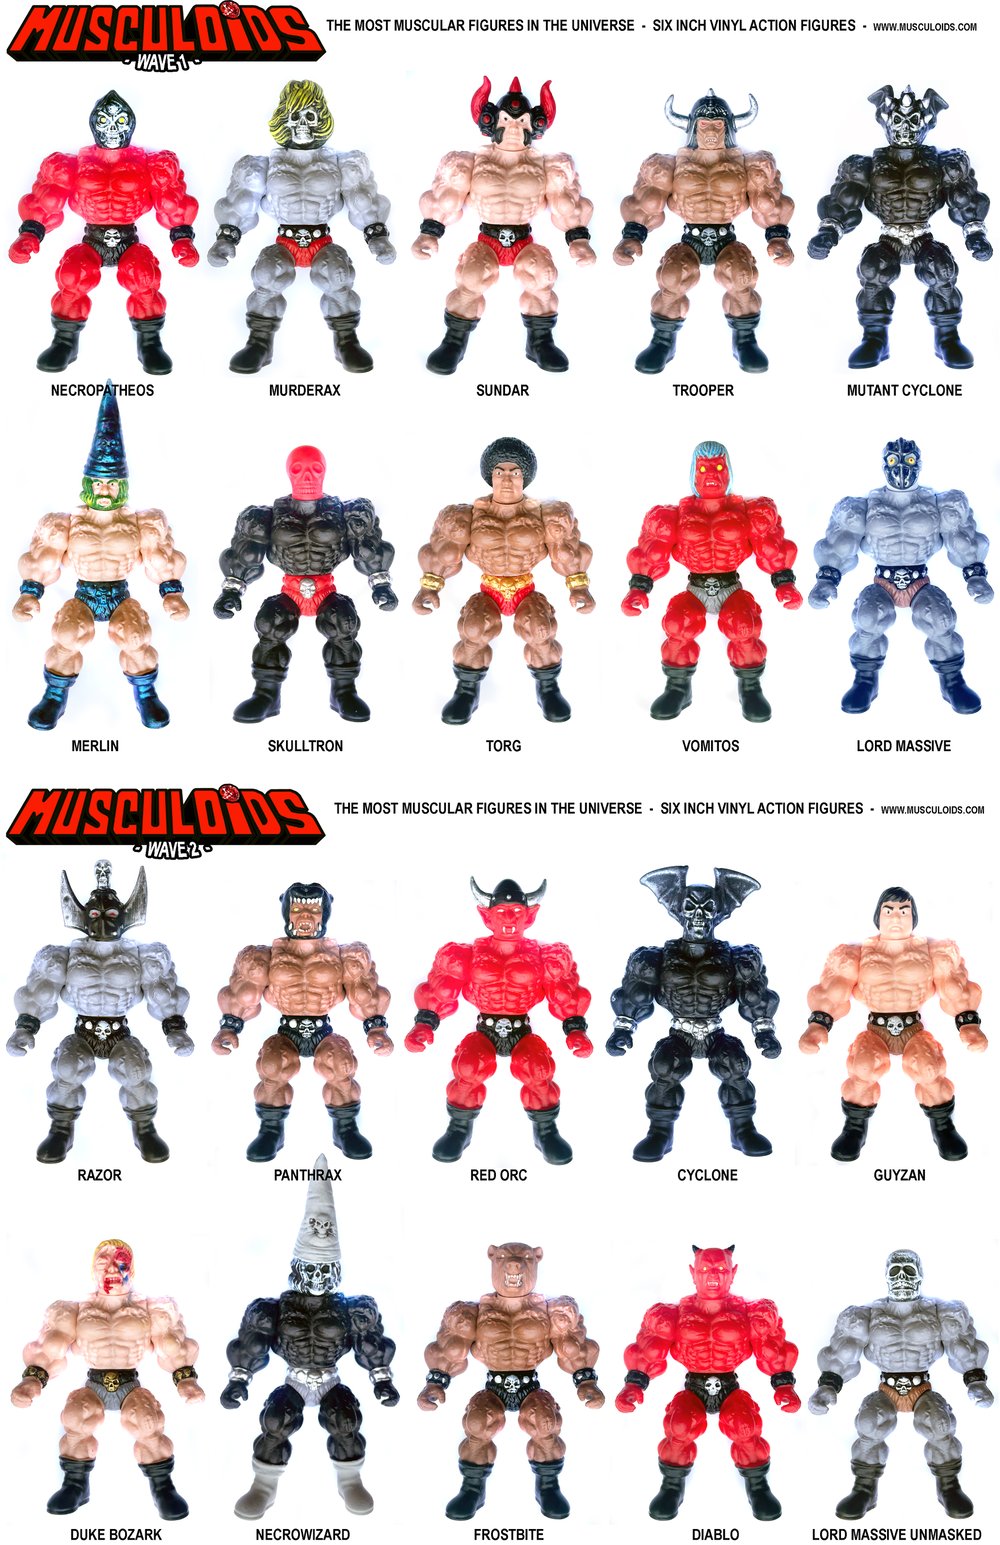 MUSCULOIDS 6" - select Wave 1 or Wave 2